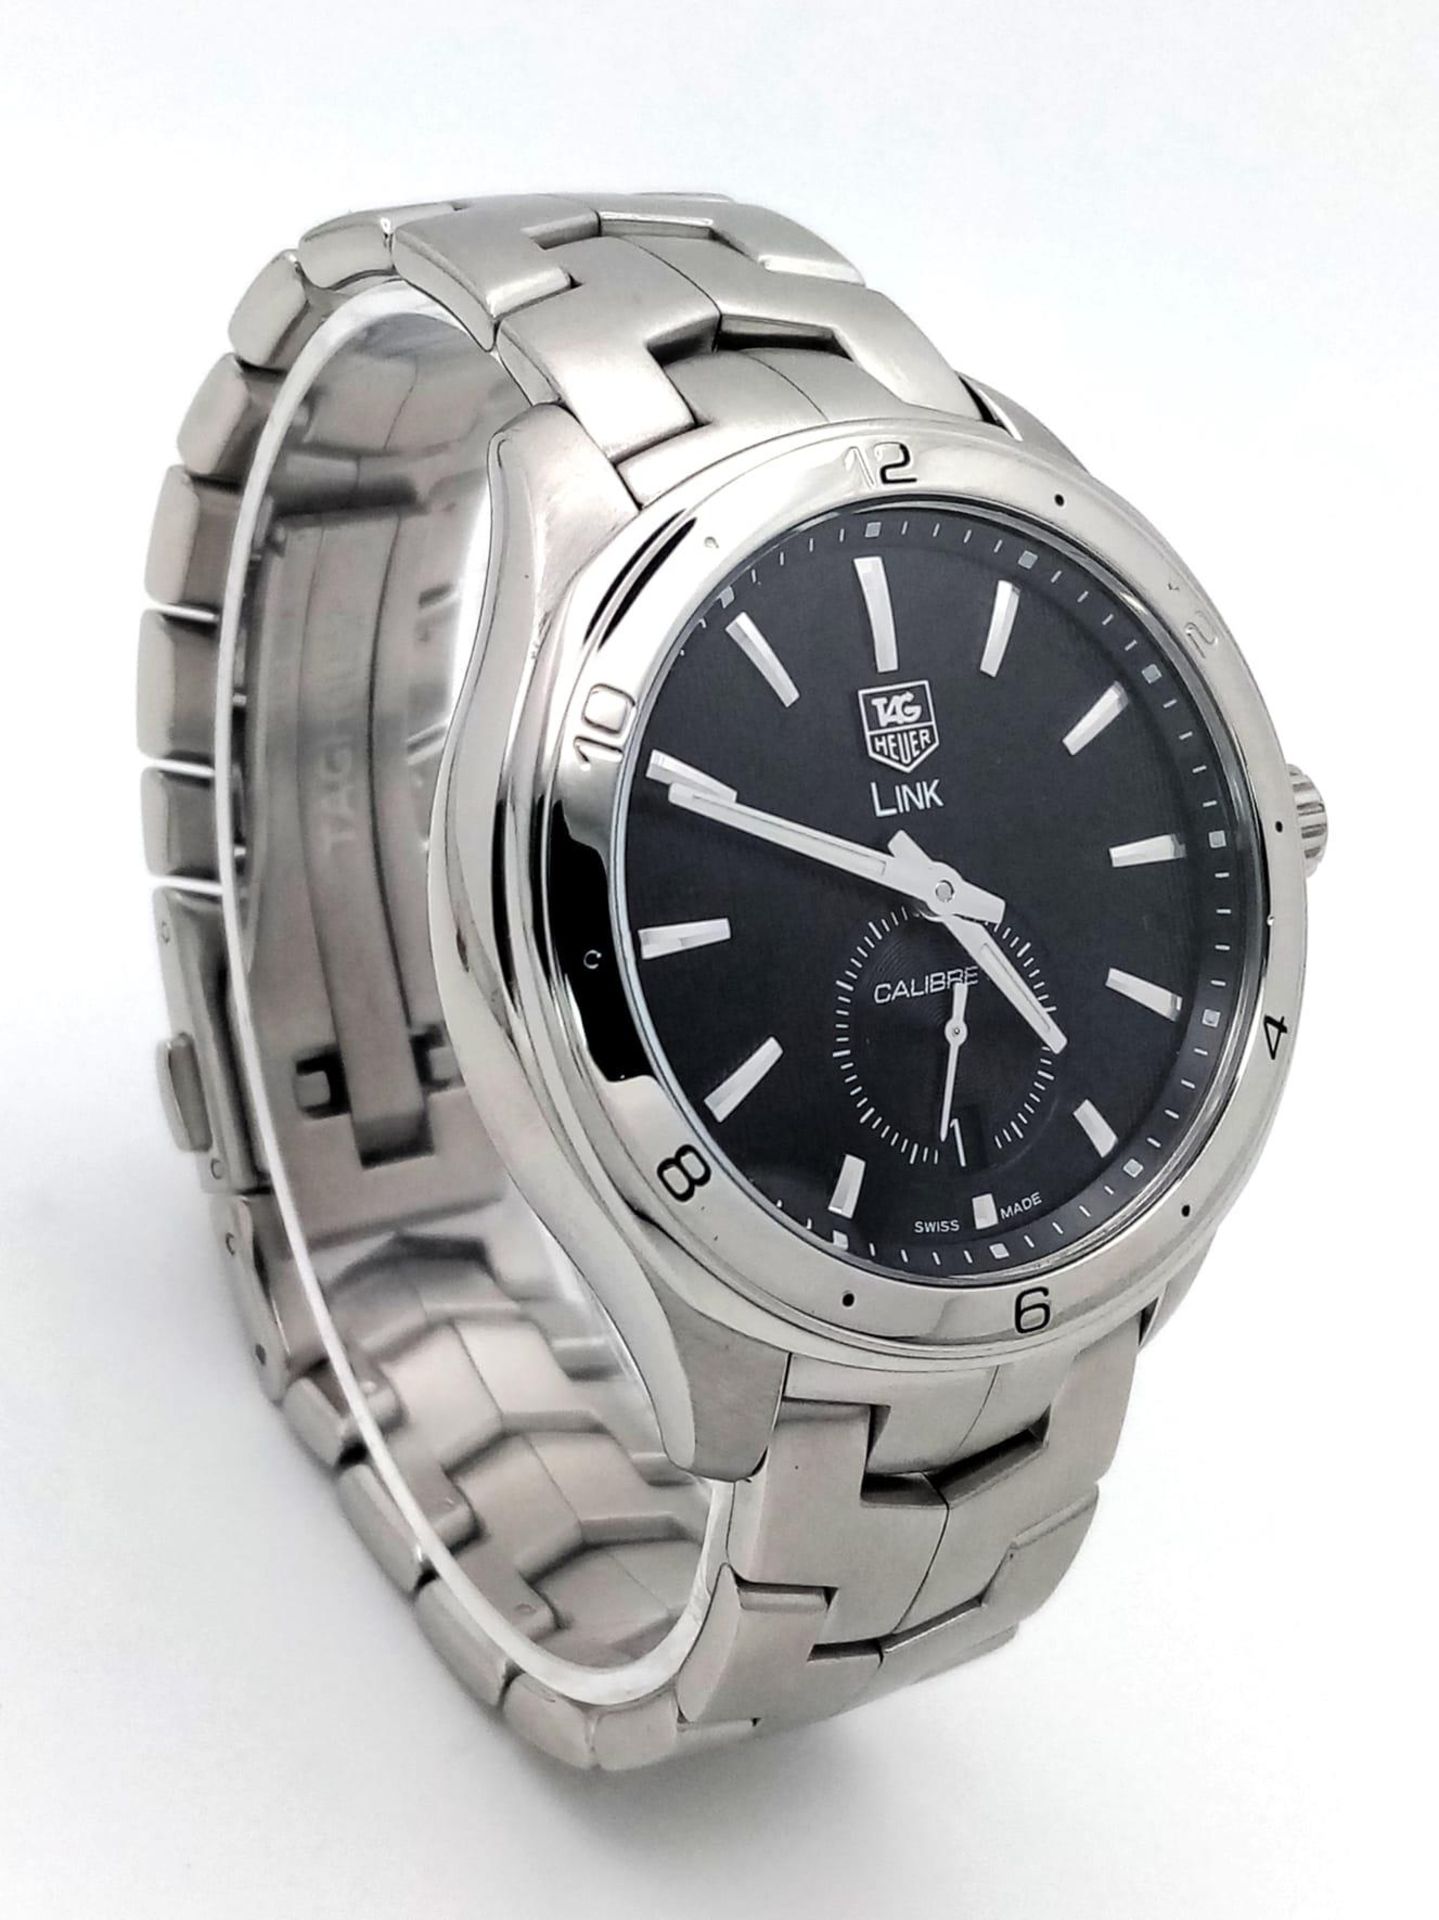 A Tag Heuer Link Calibre 6 Automatic Watch. Stainless steel bracelet and case - 41mm. Black dial - Image 2 of 9